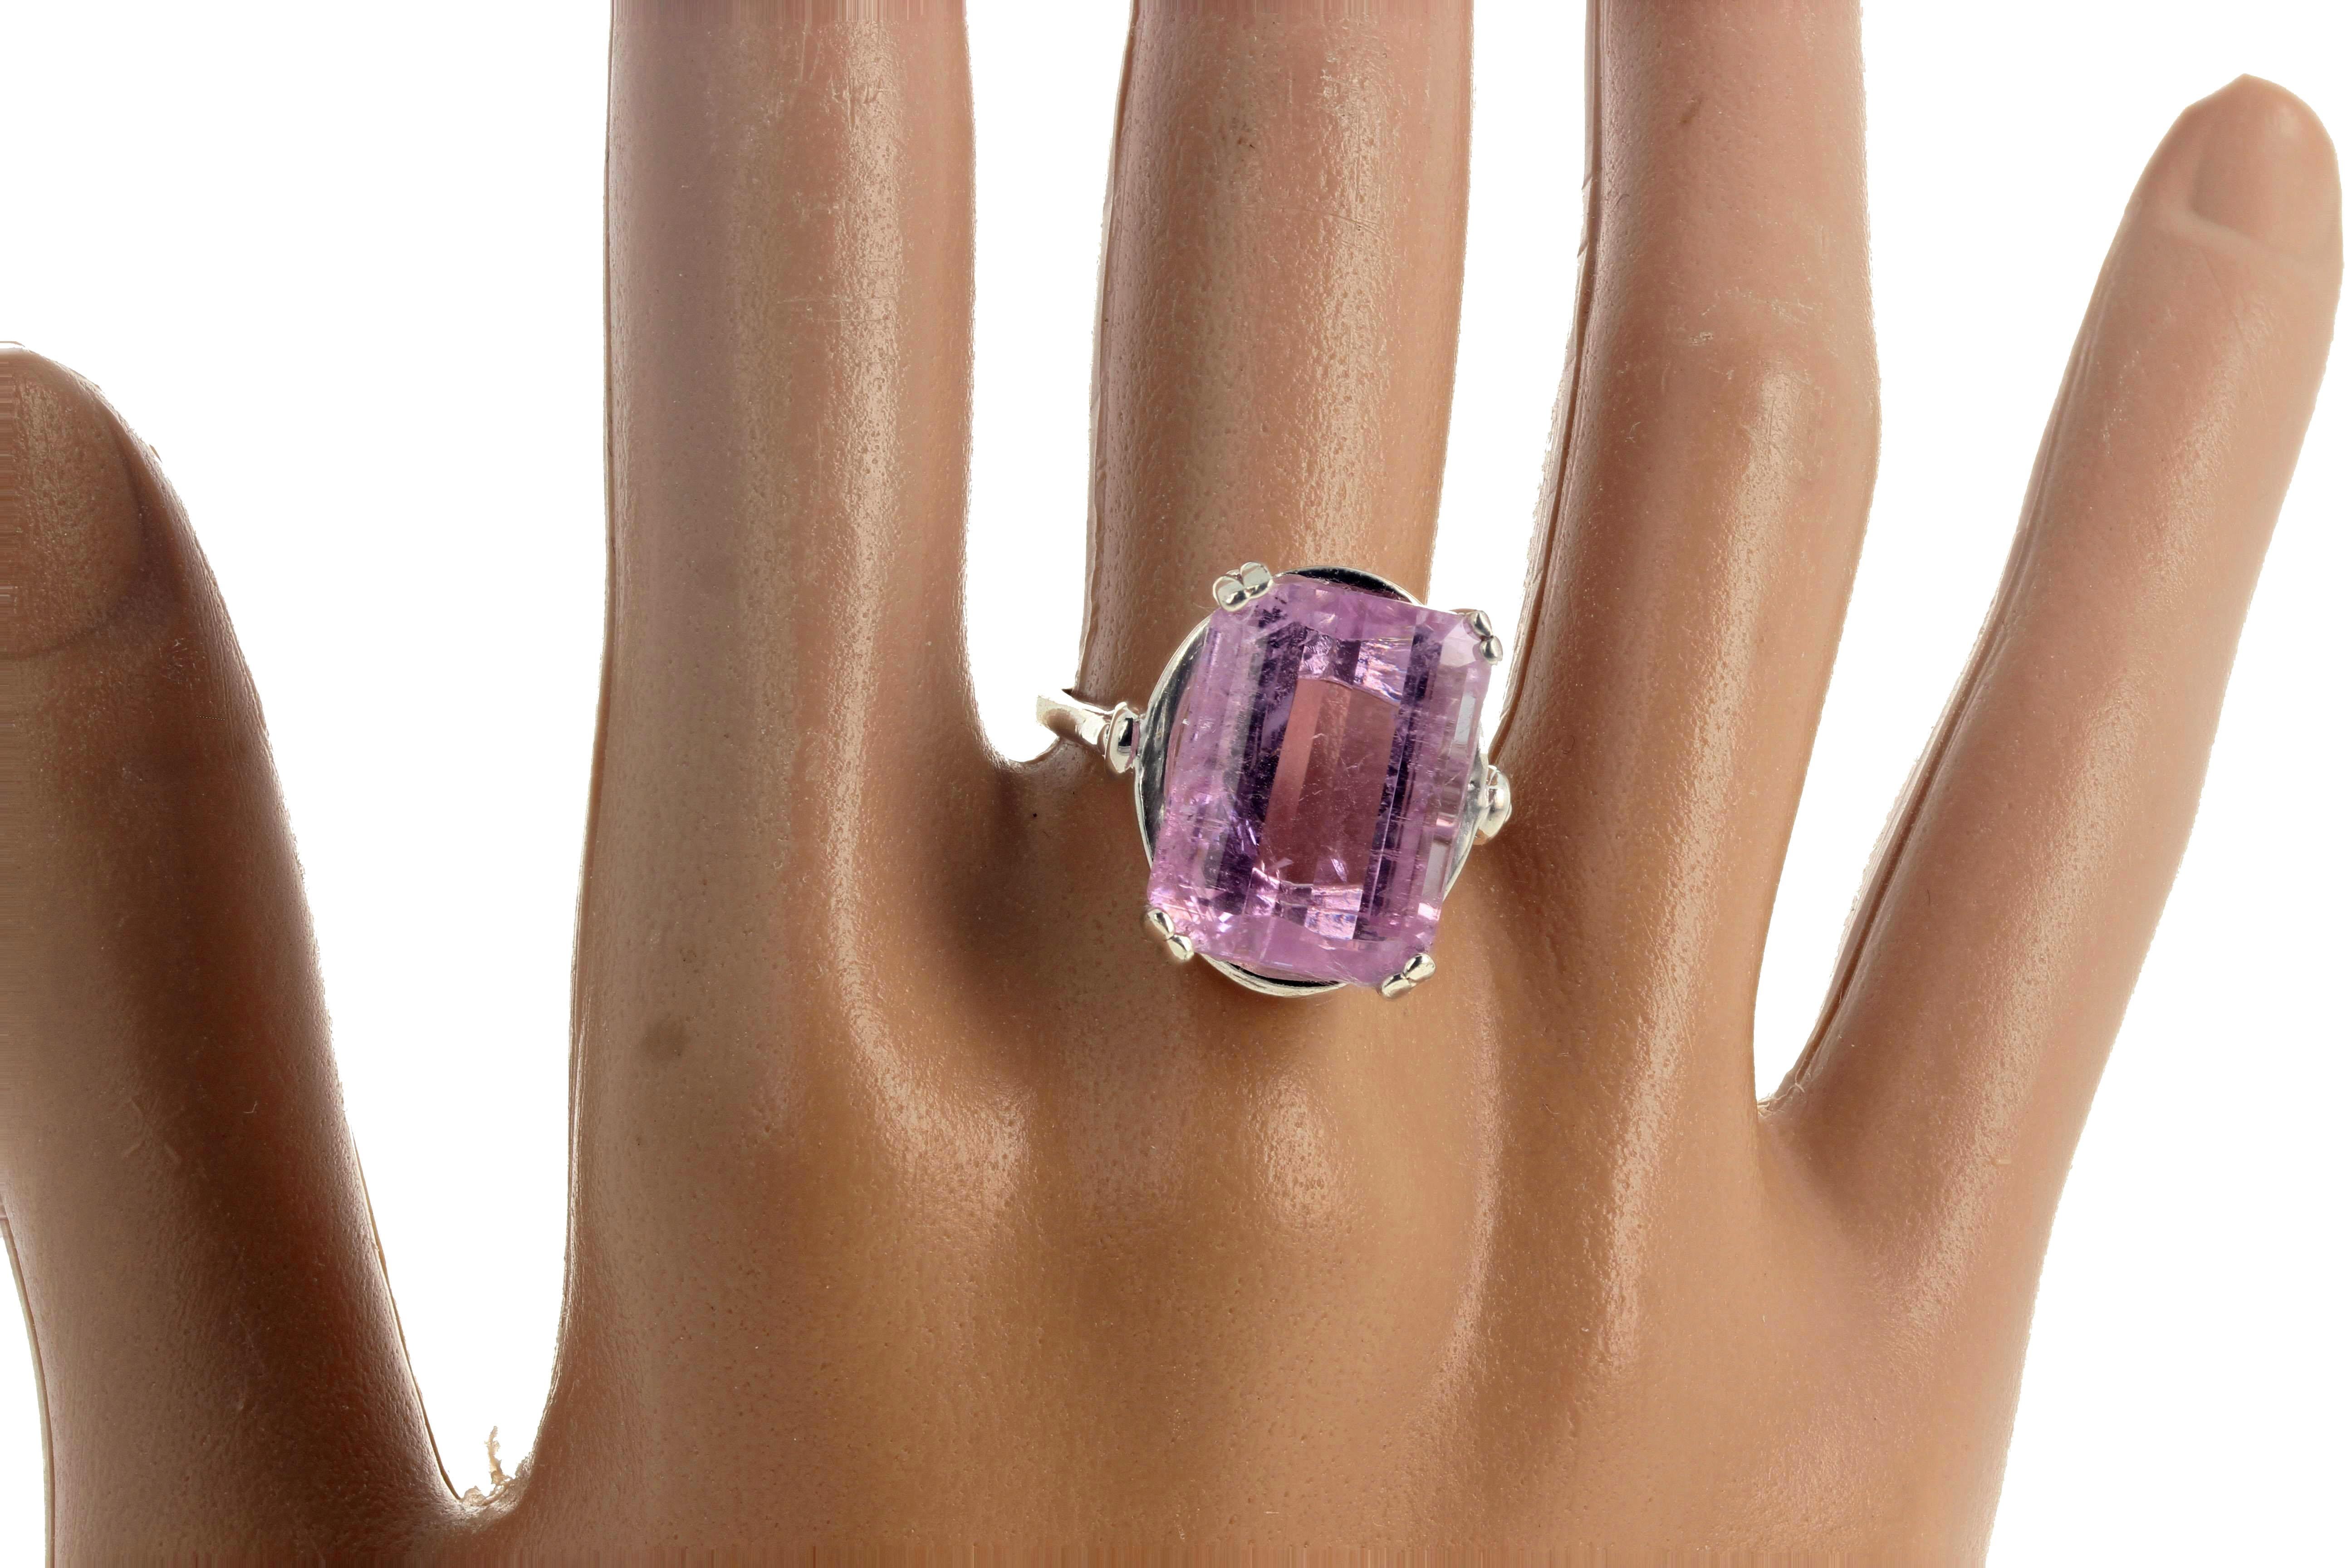 Cushion Cut Gemjunky Extraordinary Brillant 12.6 Ct. Pink Kunzite Solitaire Silver Ring